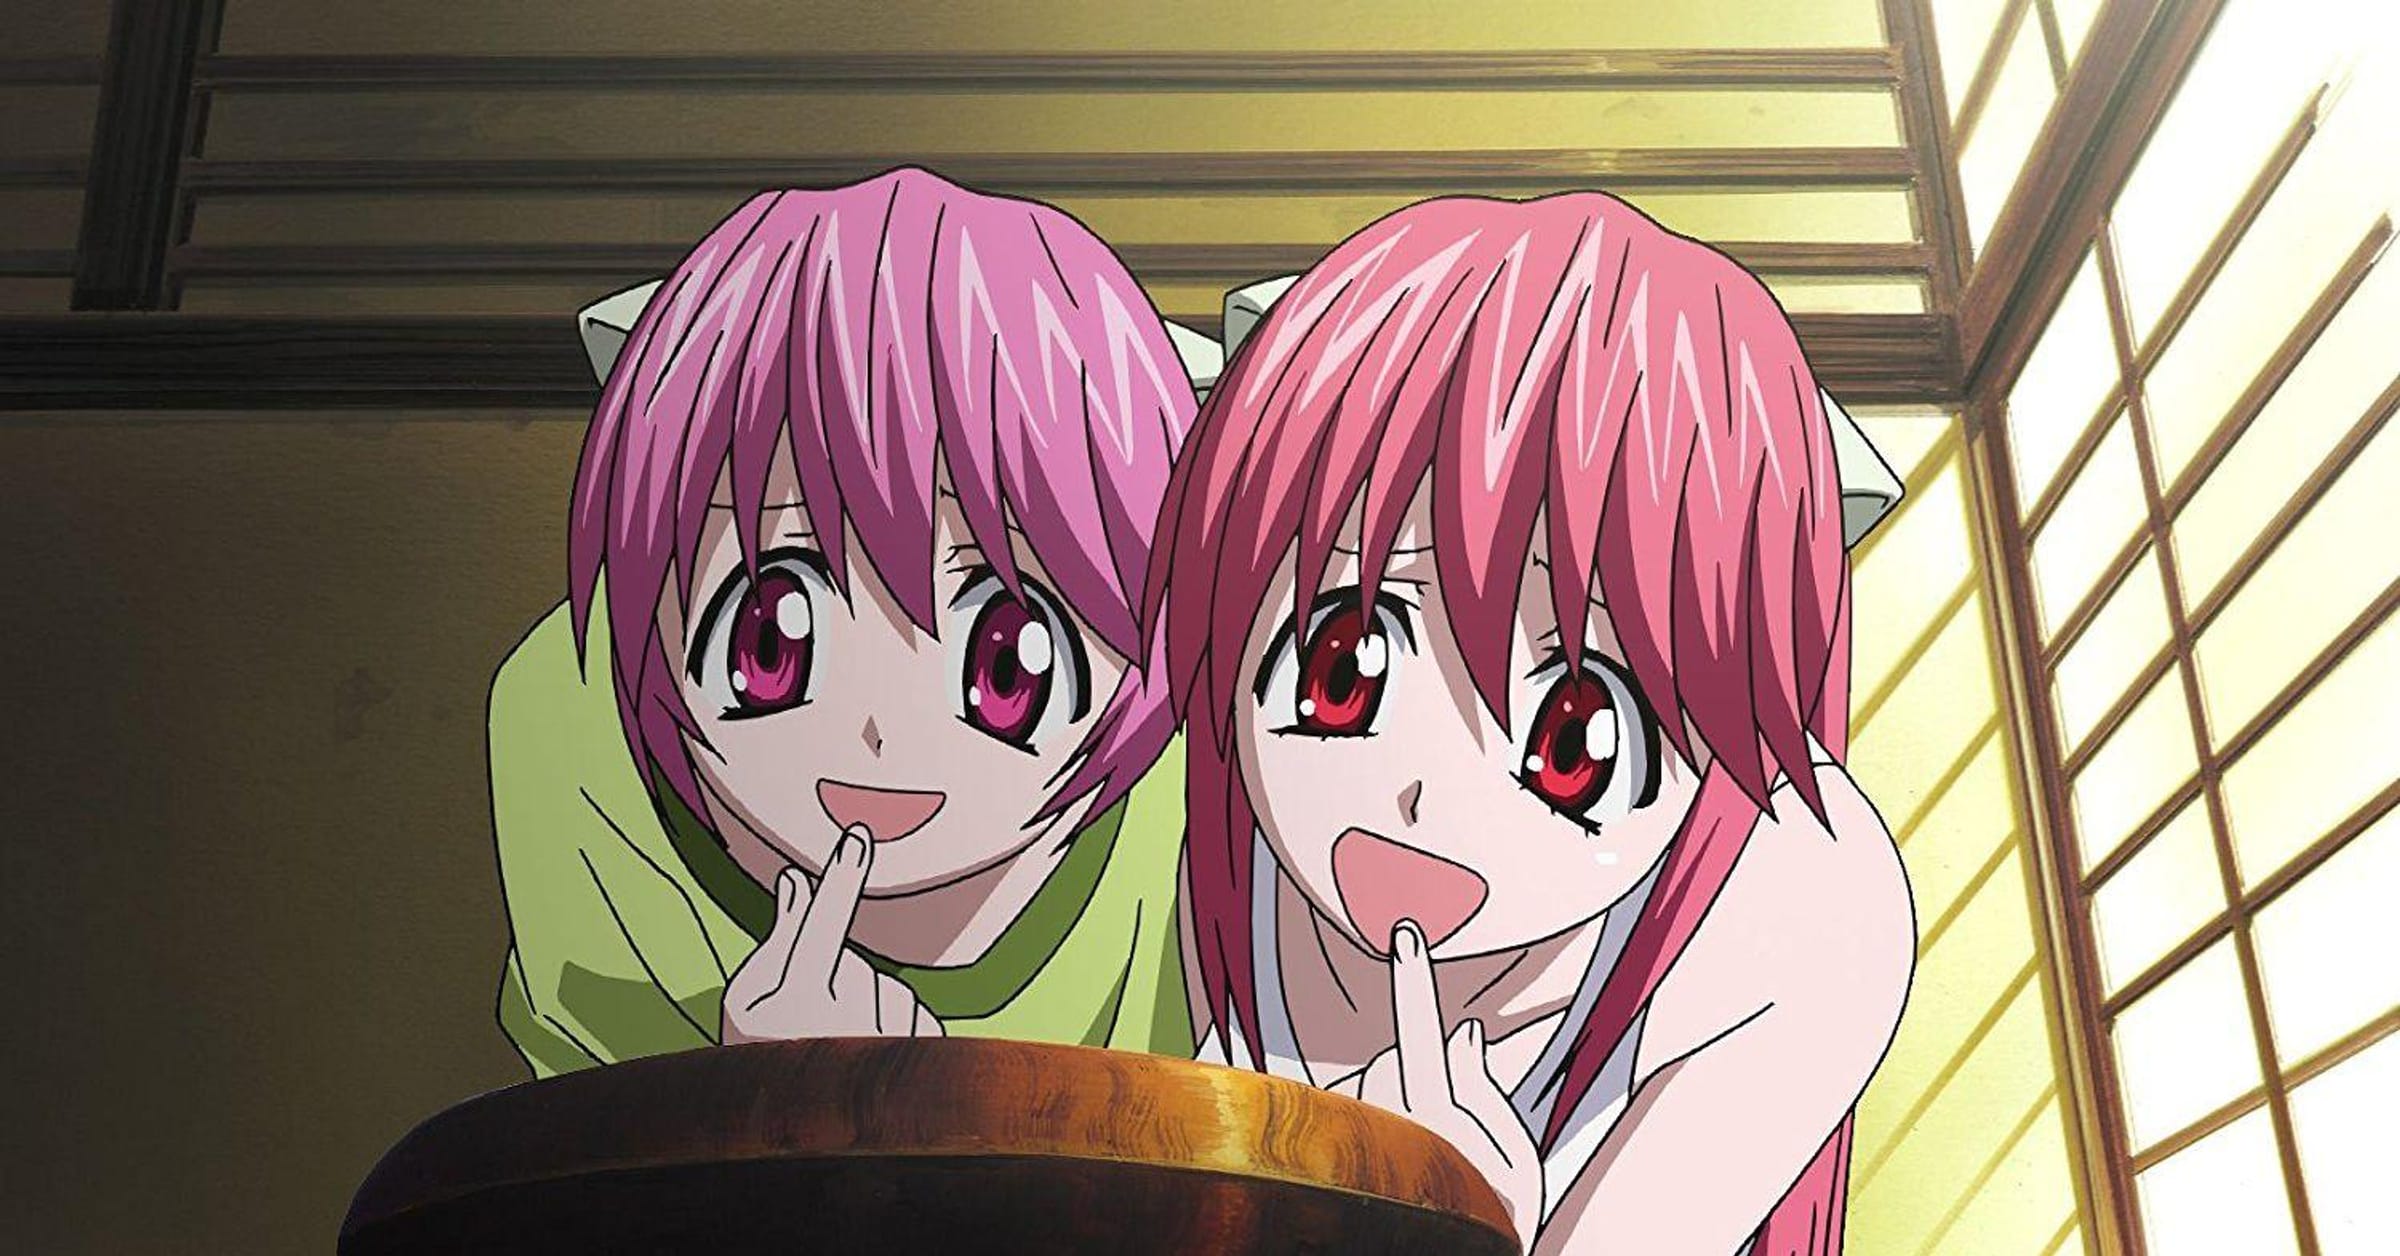 What are some anime similar to Elfen Lied in terms of themes? - Quora